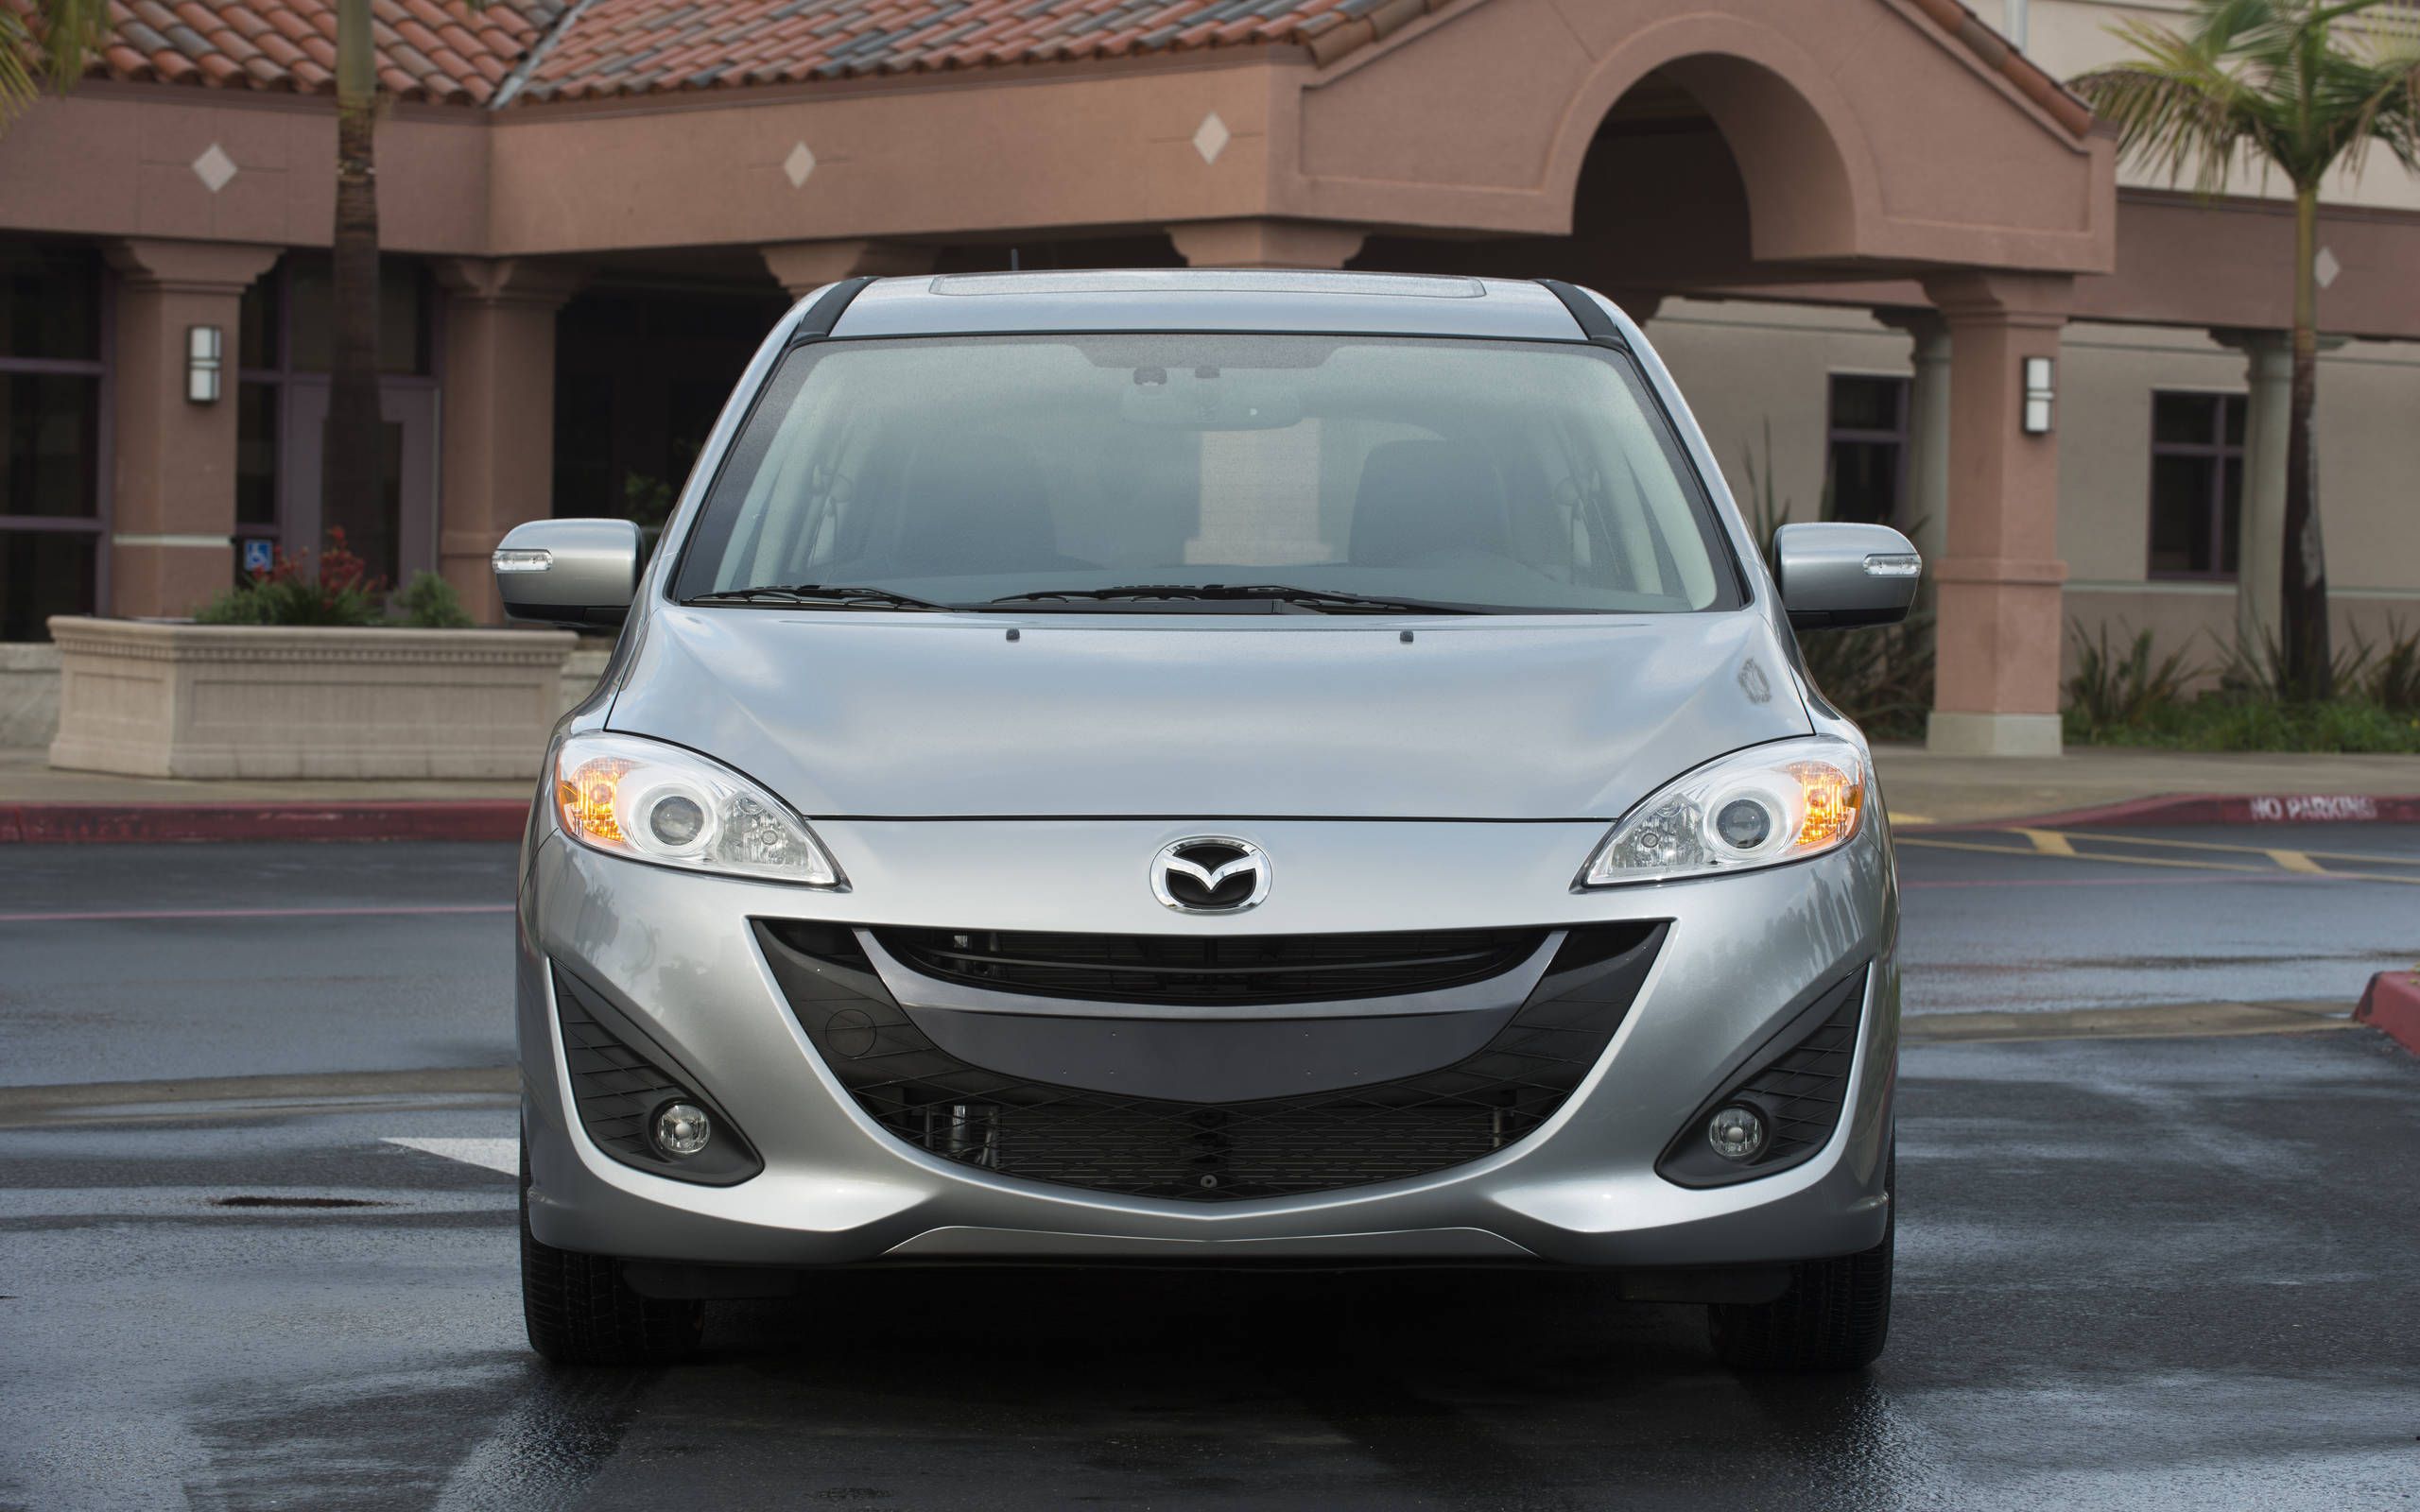 2015 Mazda 5 Grand Touring review notes